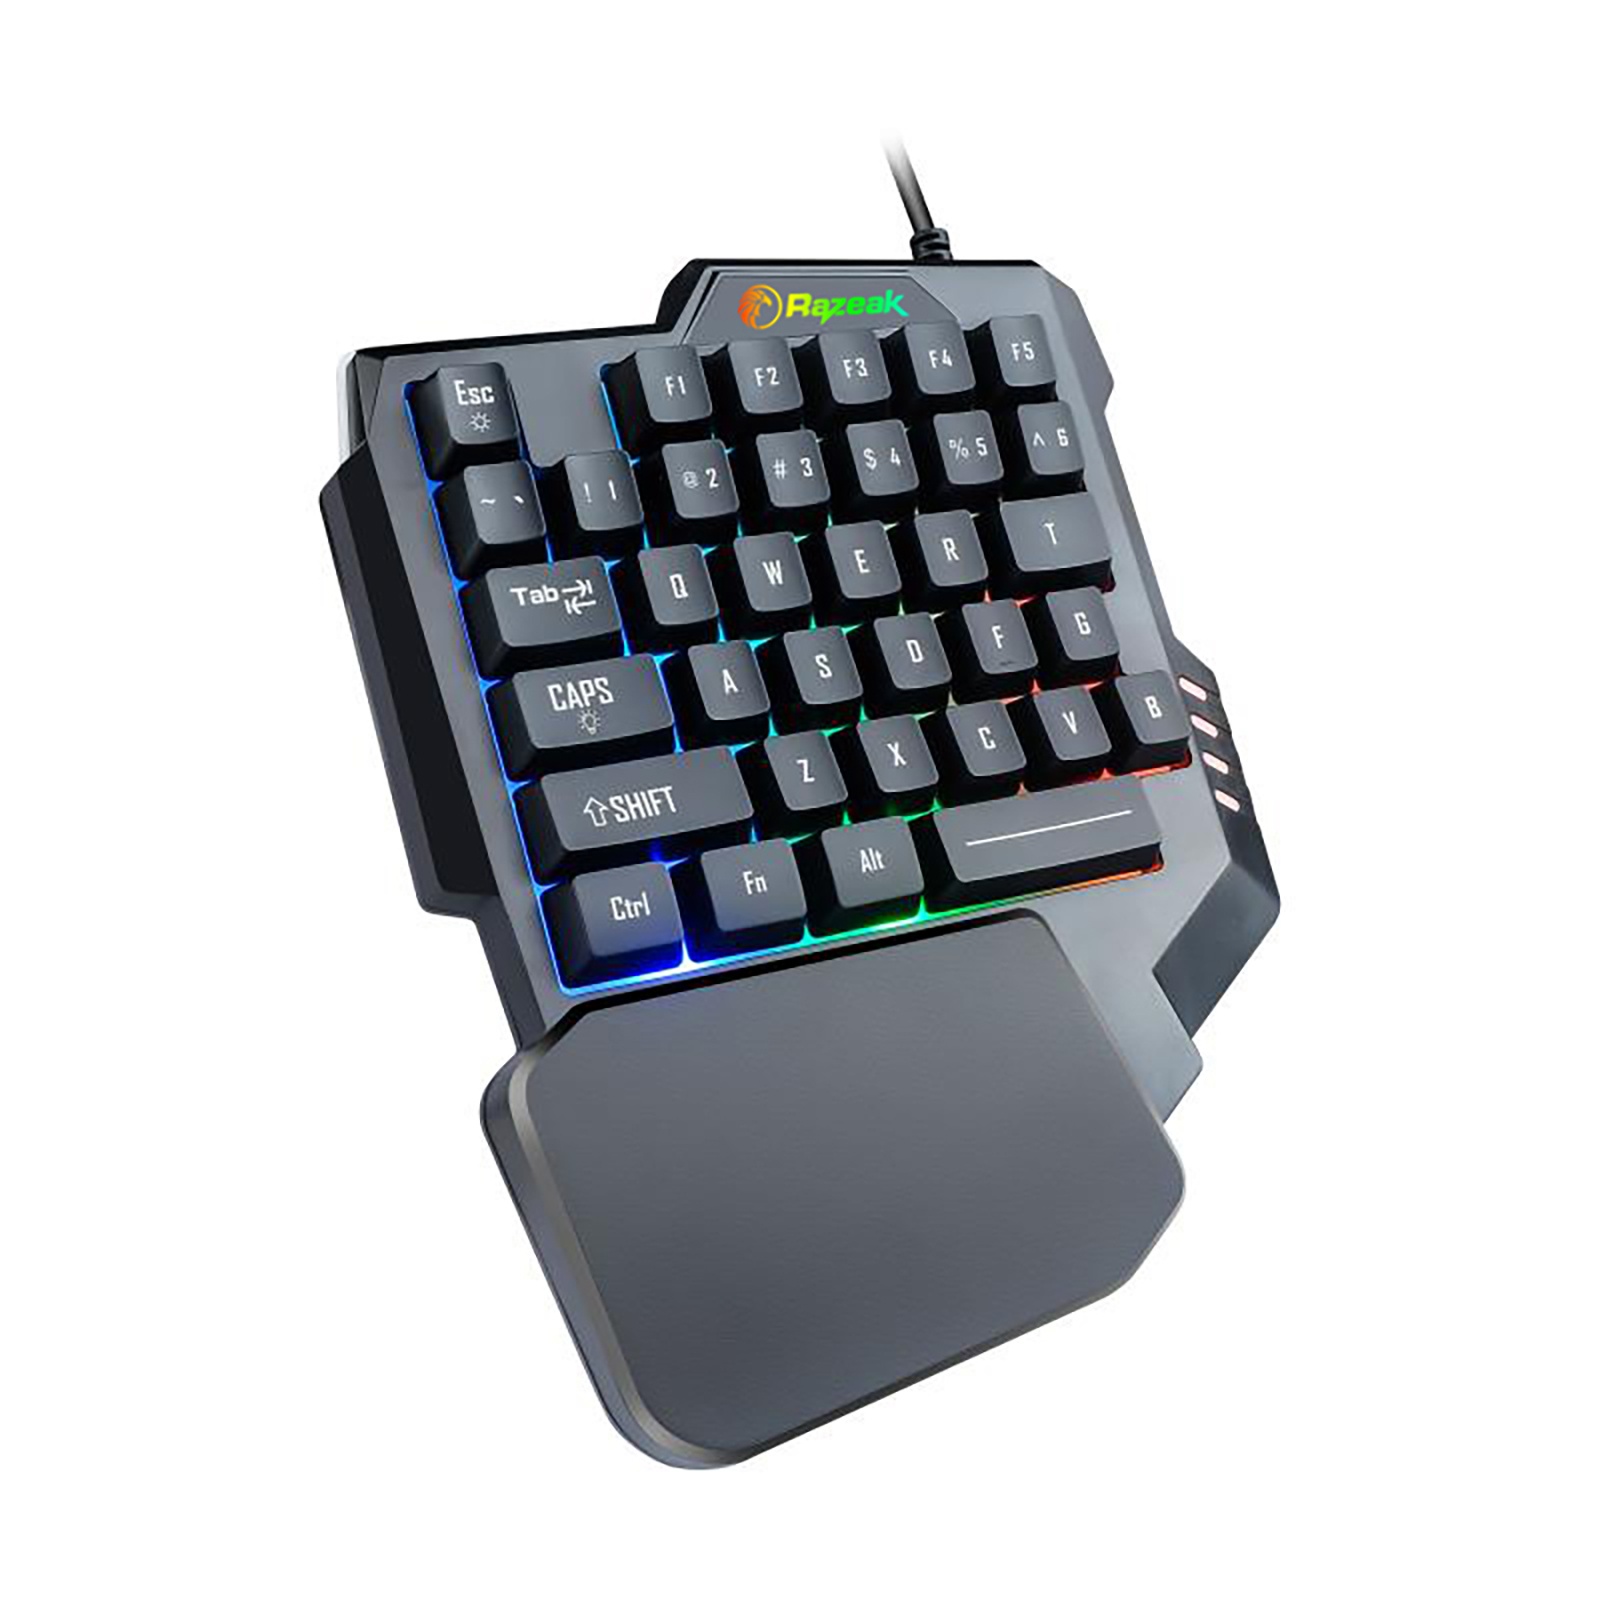 Wired one-hand gaming keyboard RK-8734